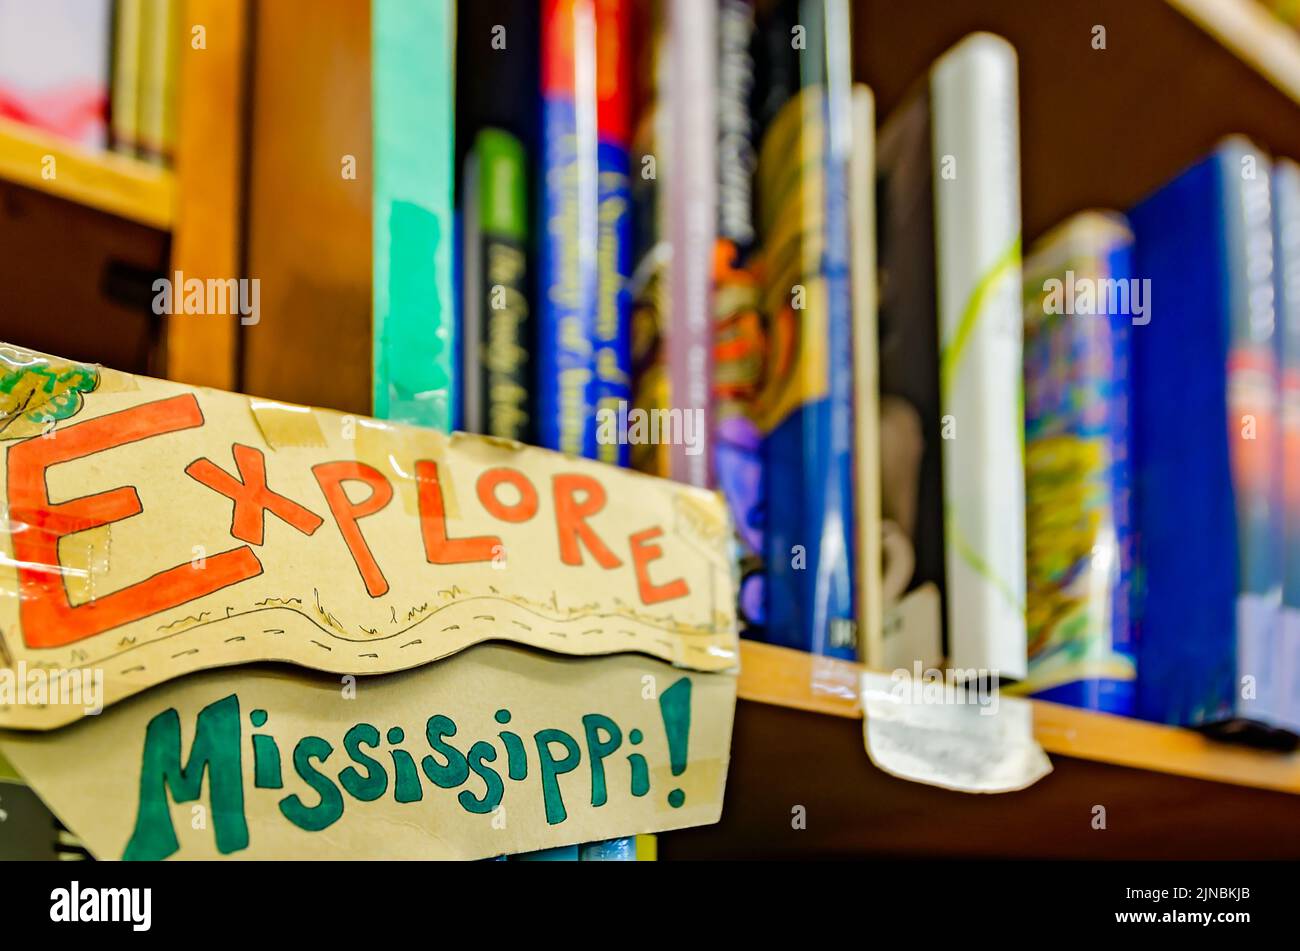 Books by Mississippi authors fill the shelves at Square Books, May 31, 2015, in Oxford, Mississippi. The family-owned bookstore was founded in 1979. Stock Photo